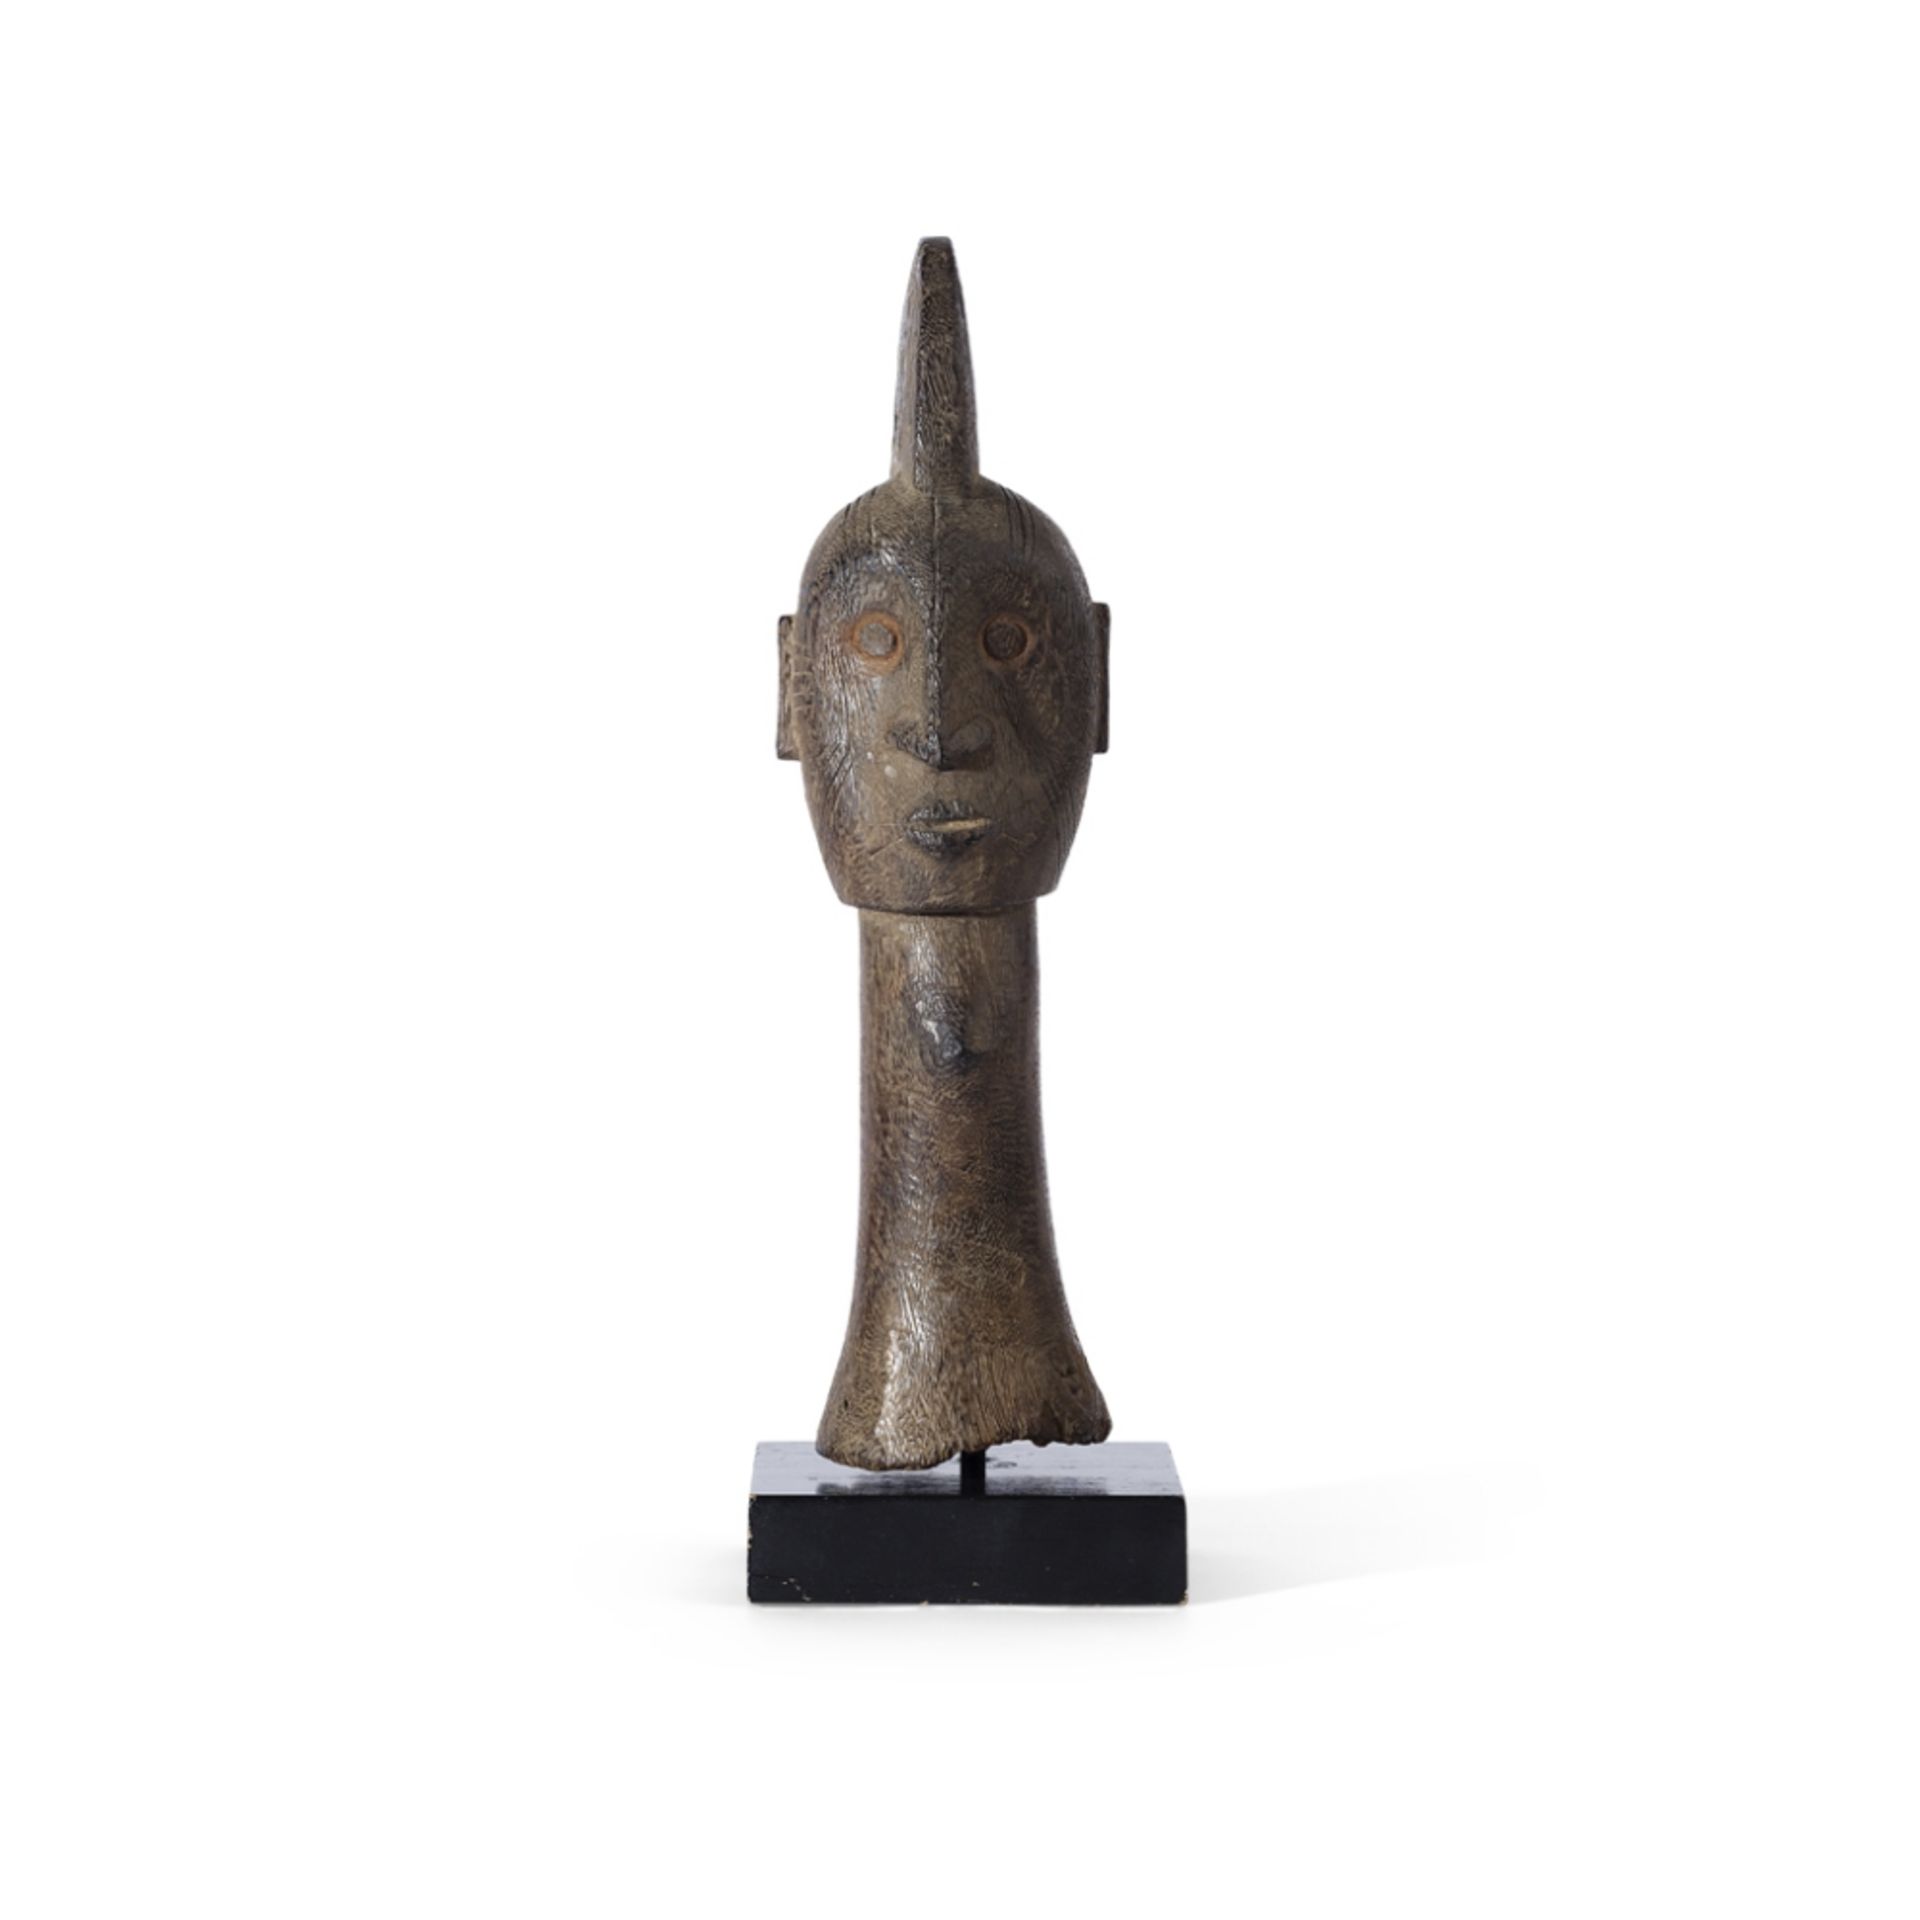 IGALA HEAD CRESTNIGERIA carved wood, a tall neck leading to the head with pursed lips, slender